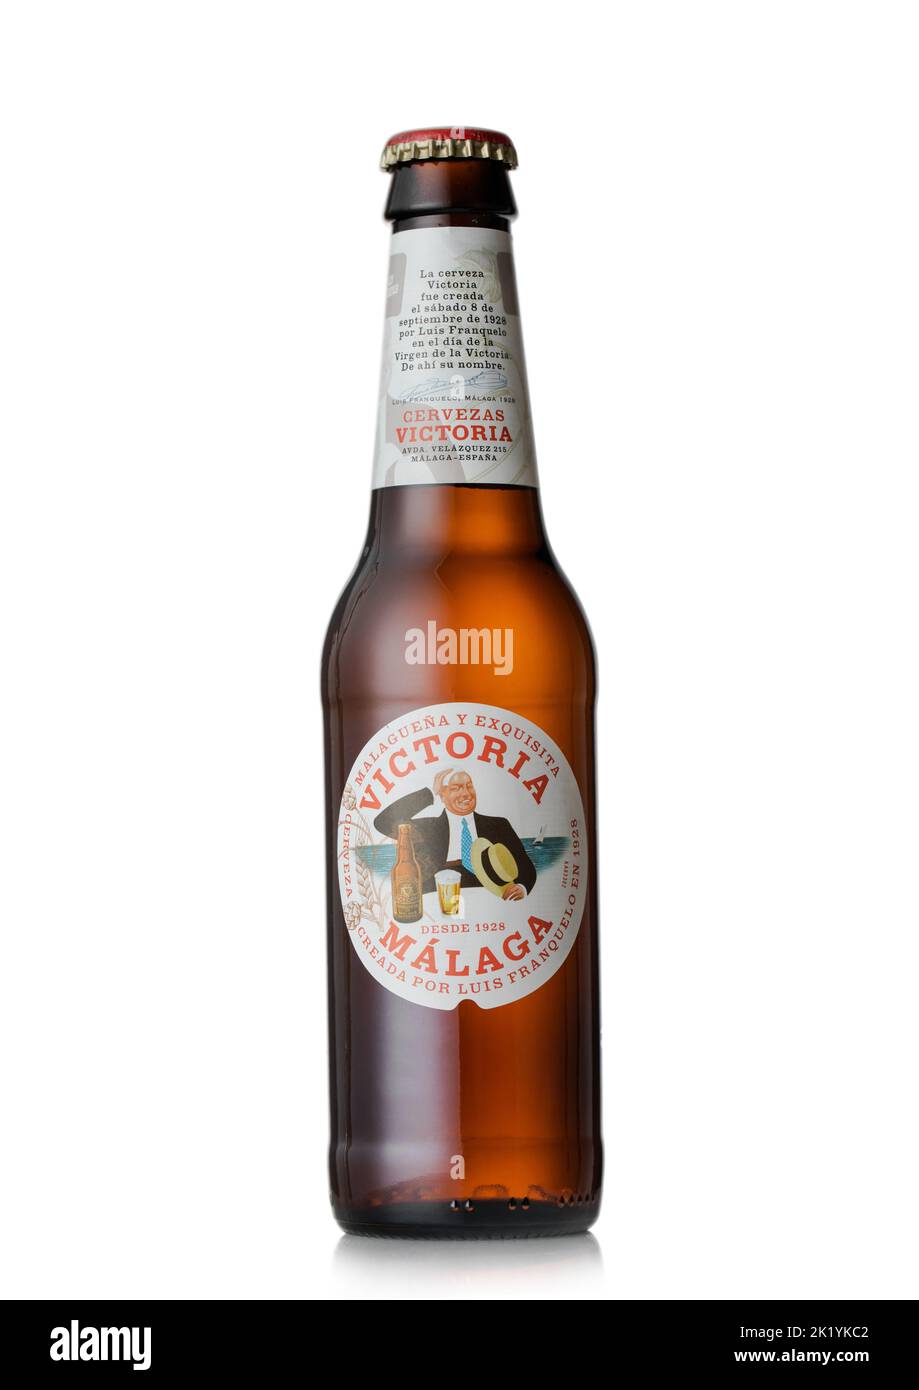 LONDON, UK - AUGUST 10, 2022: Bottle of Victoria Malaga lager beer on white. Stock Photo